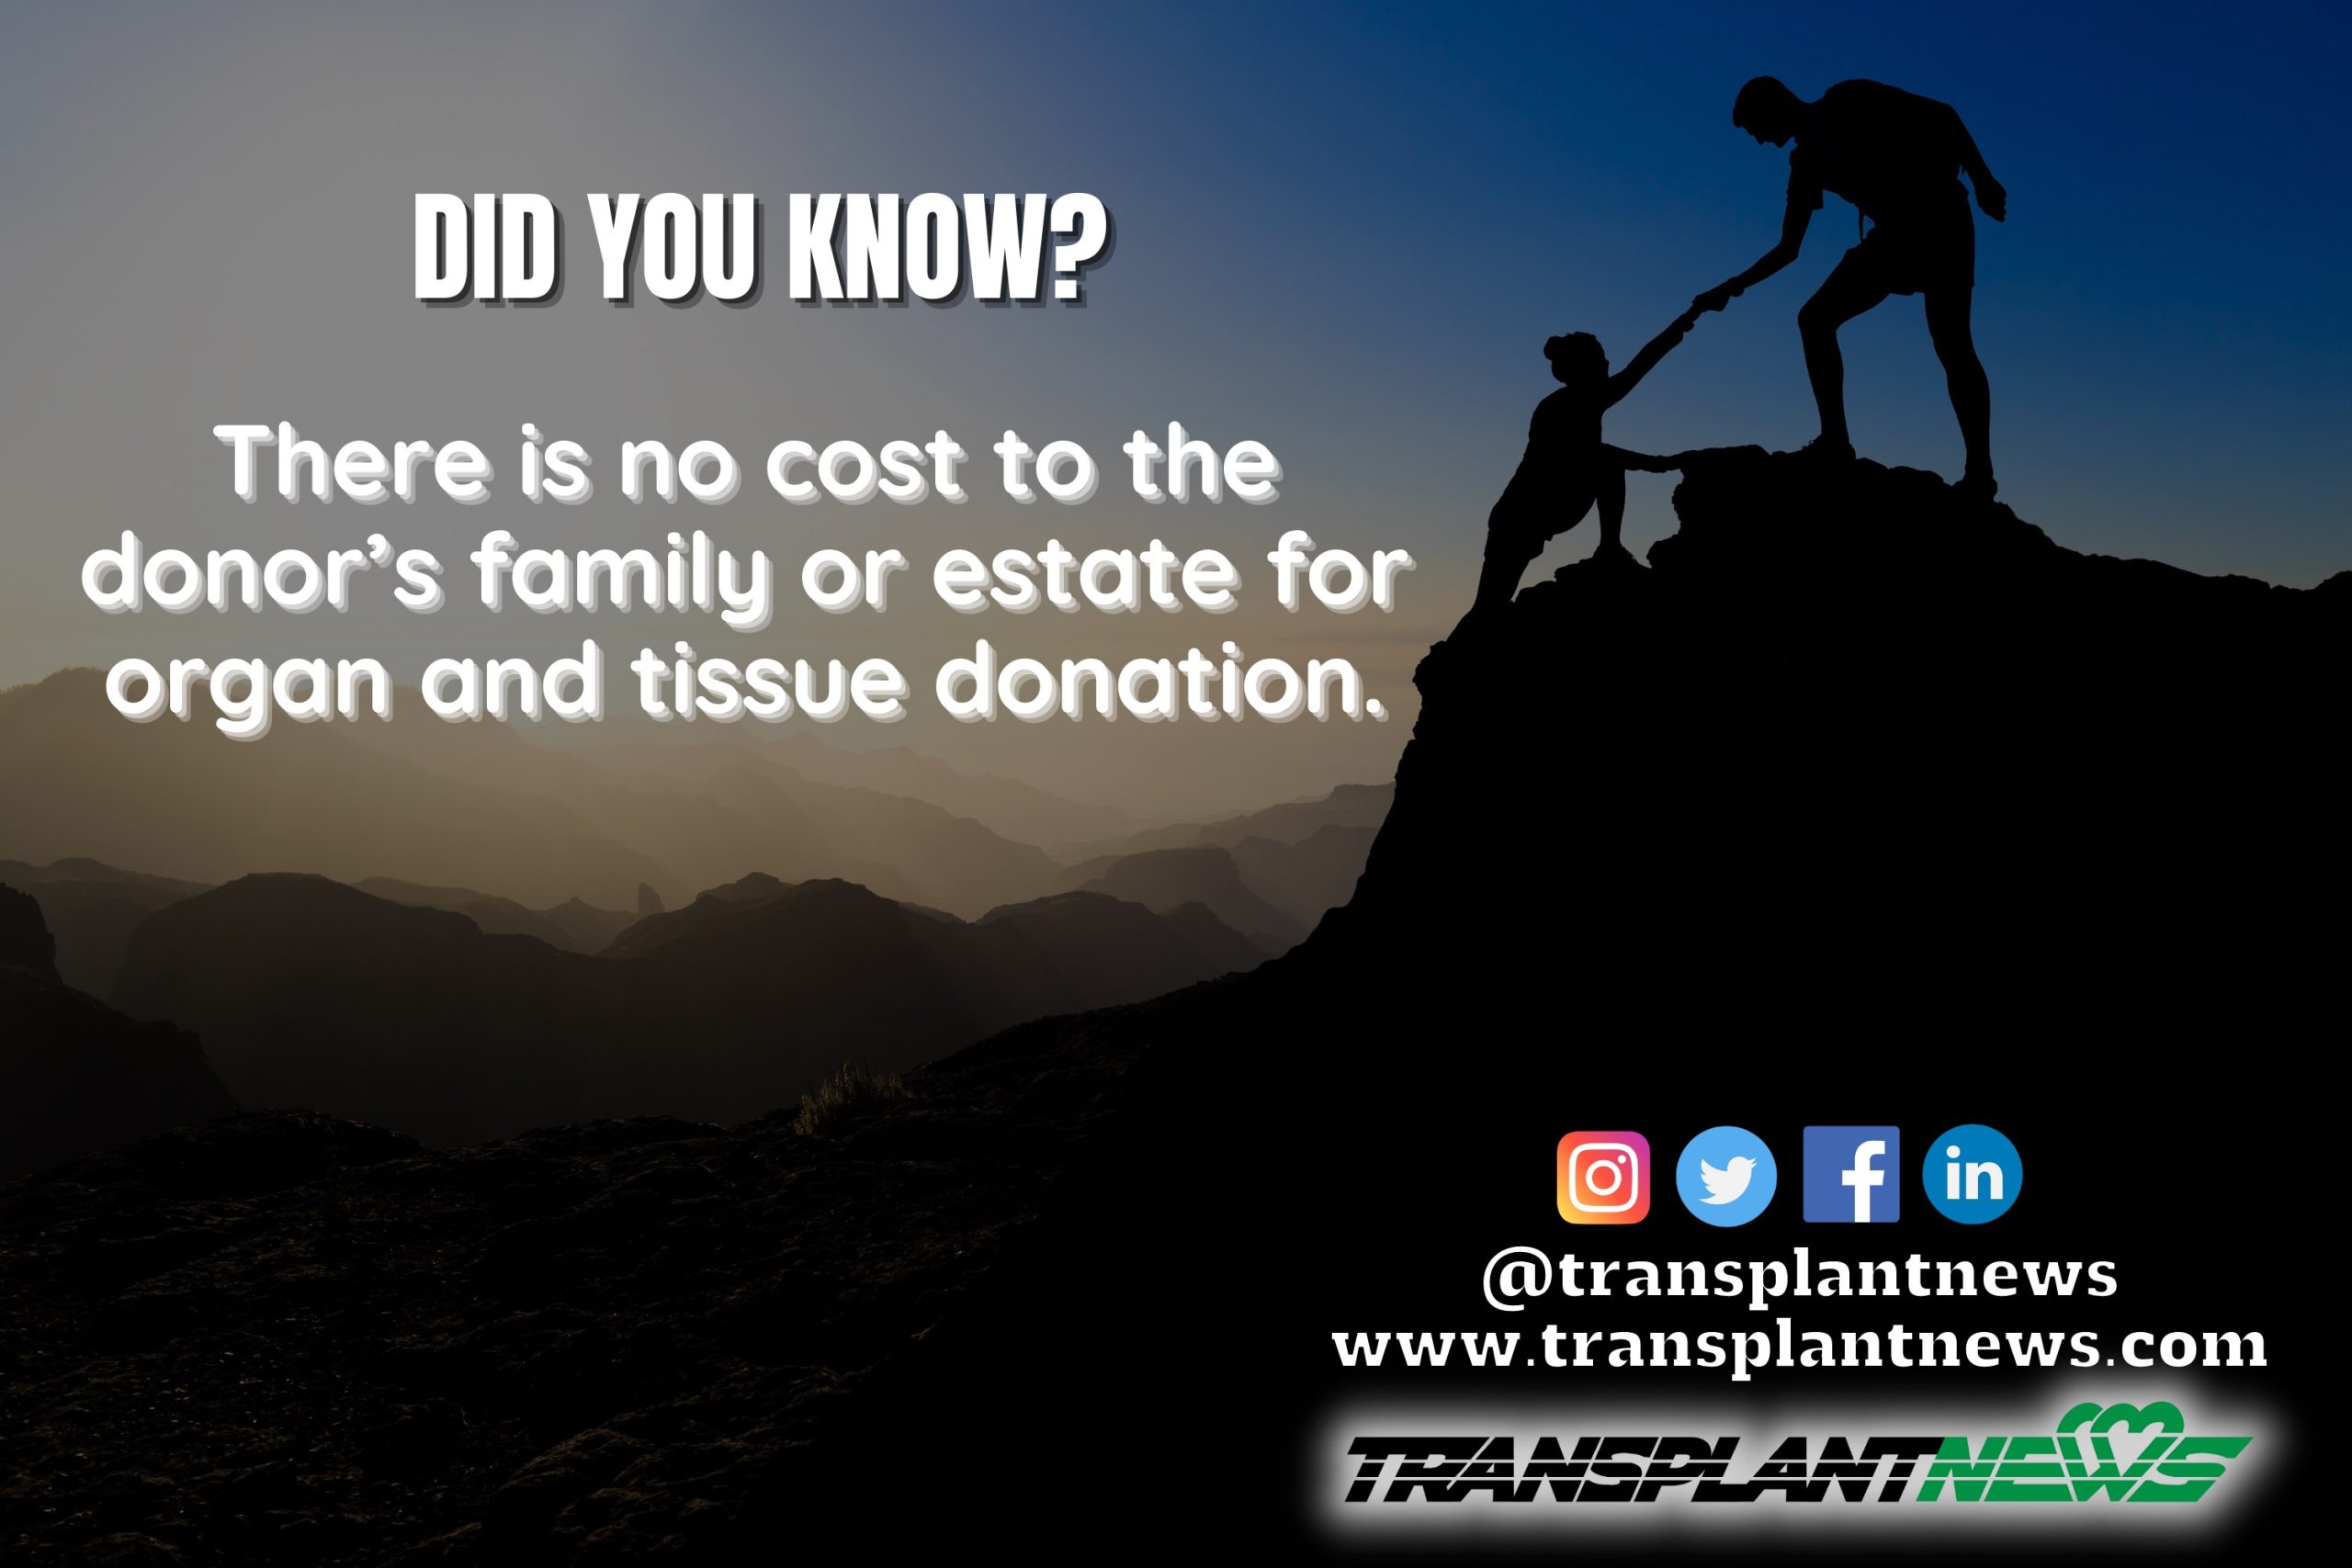 A graphic with mountain climbing stock imagery reads DID YOU KNOW? There is no cost to the donor's family or estate for organ and titue donation. It features the Transplant News logo with the website www.transplantnews.com and social media icons.